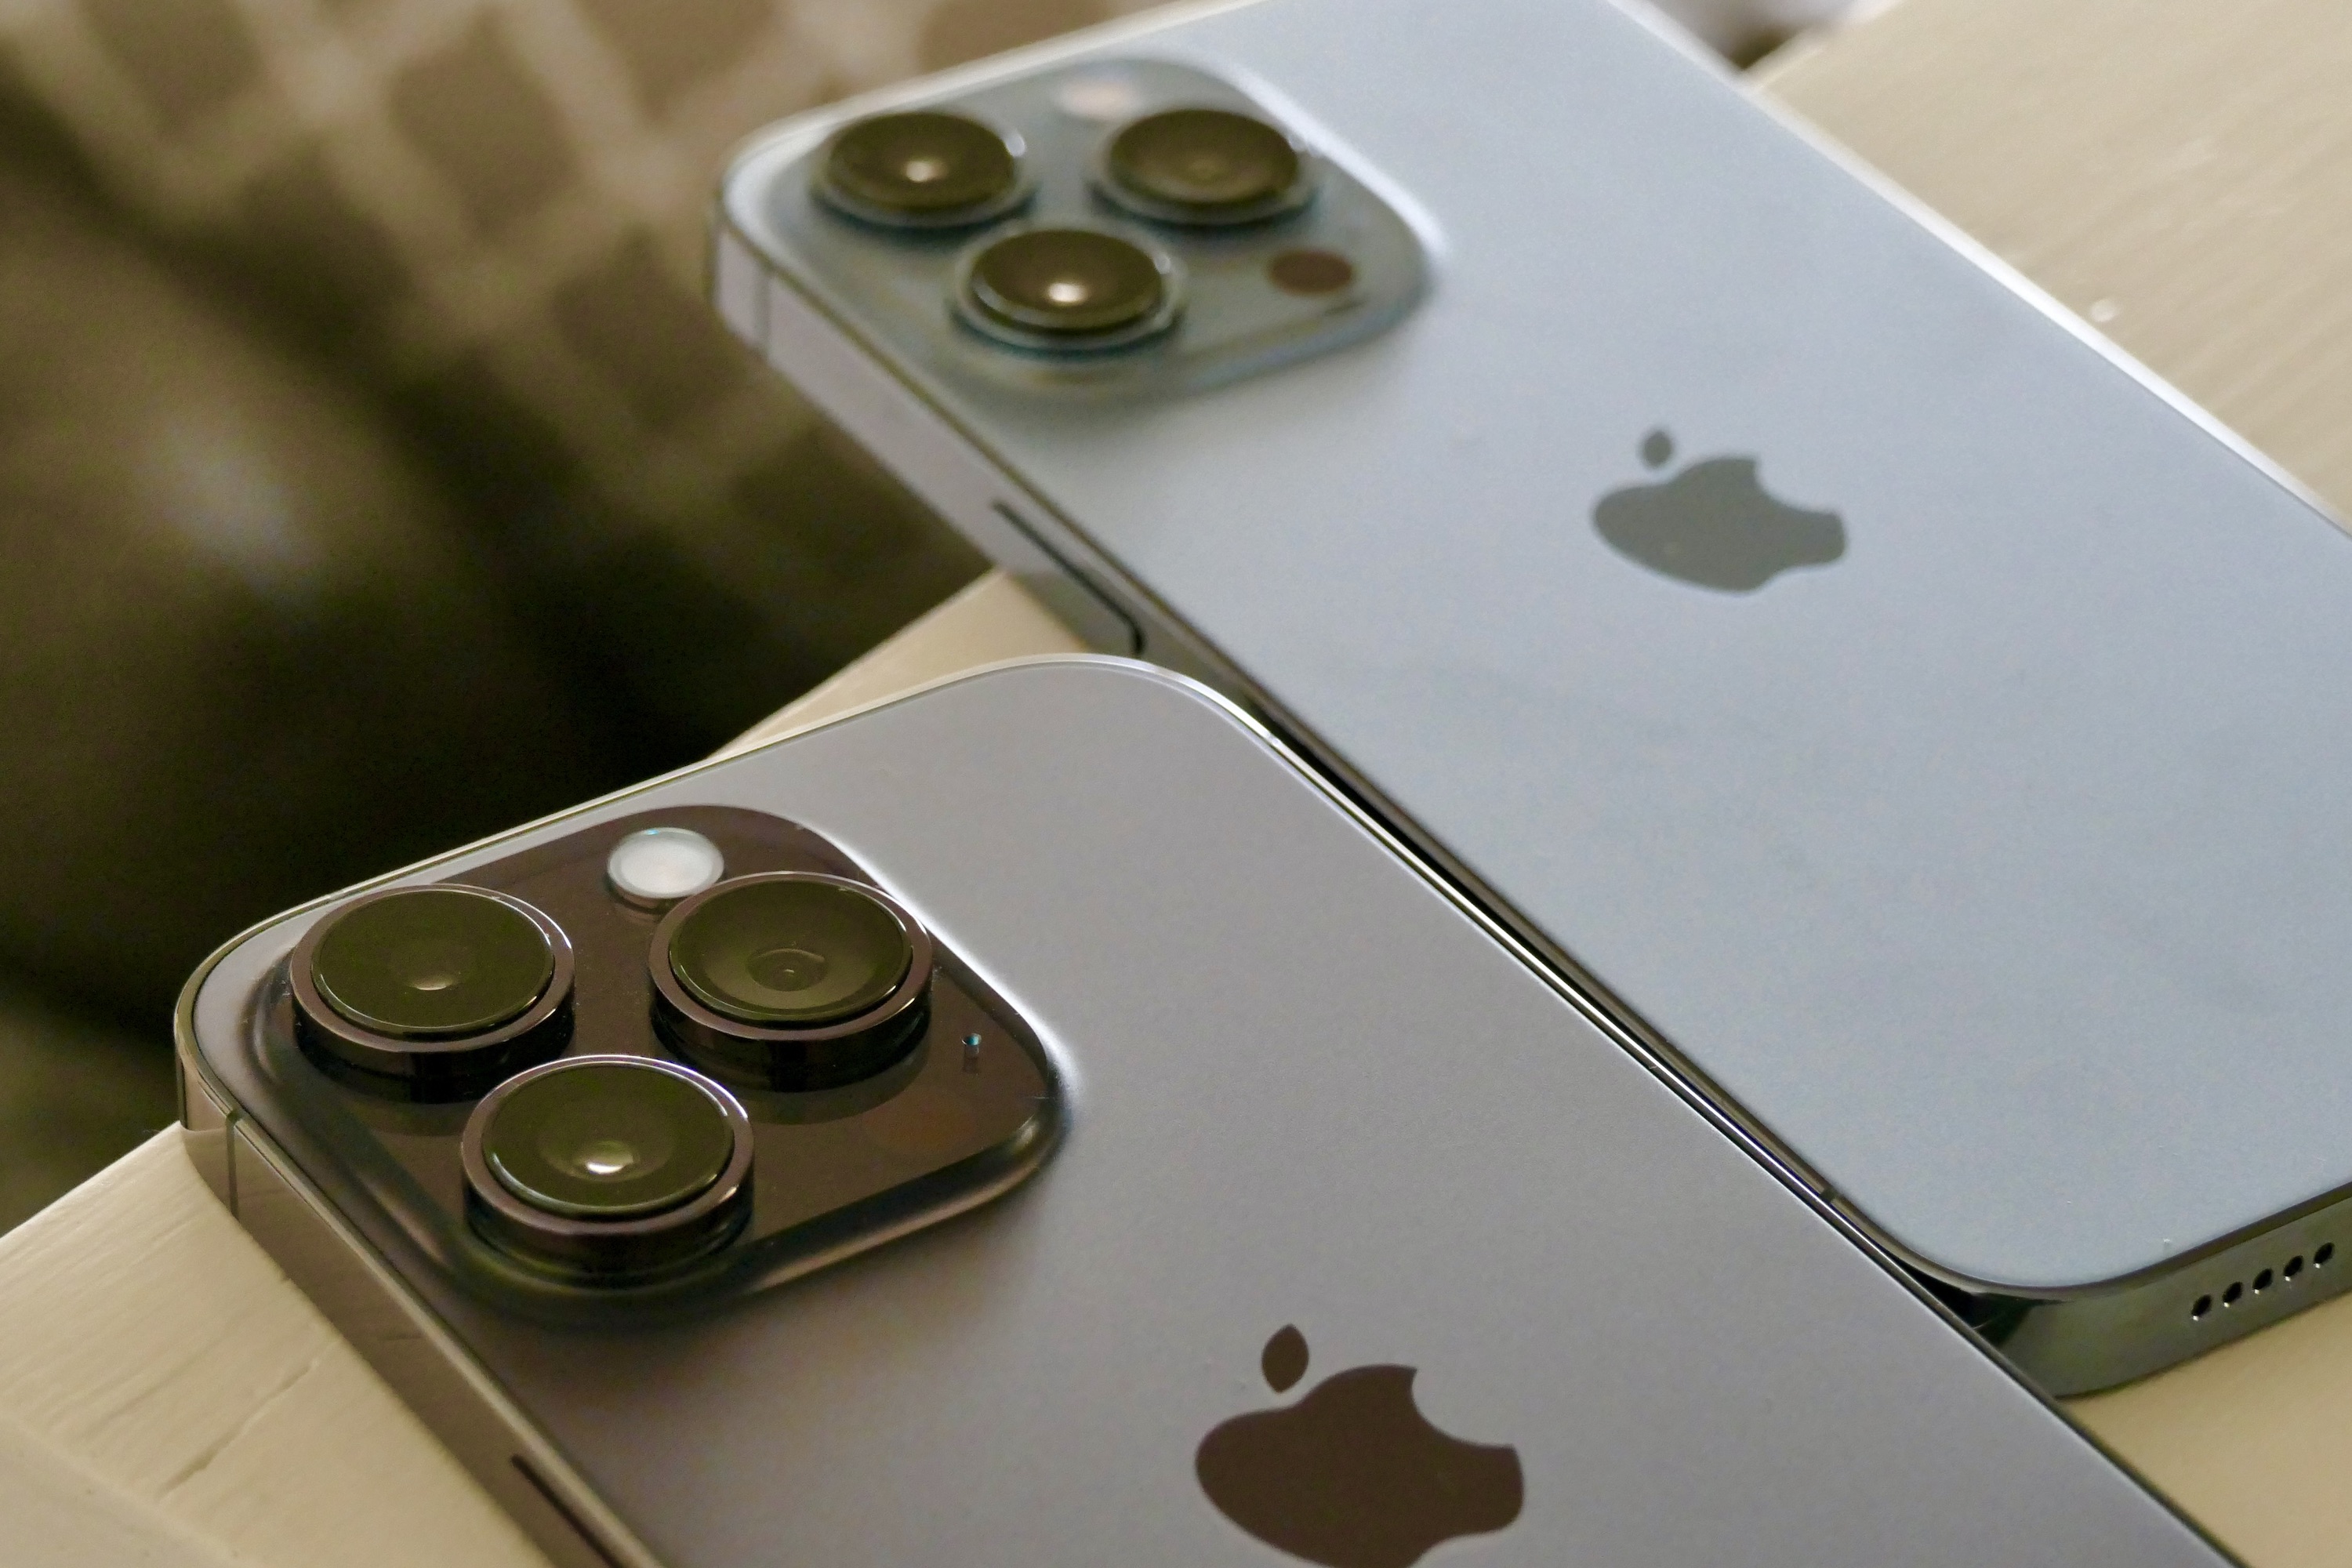 iphone-14-pro-vs-iphone-13-pro-camera-battle-isn-t-as-close-as-you-think